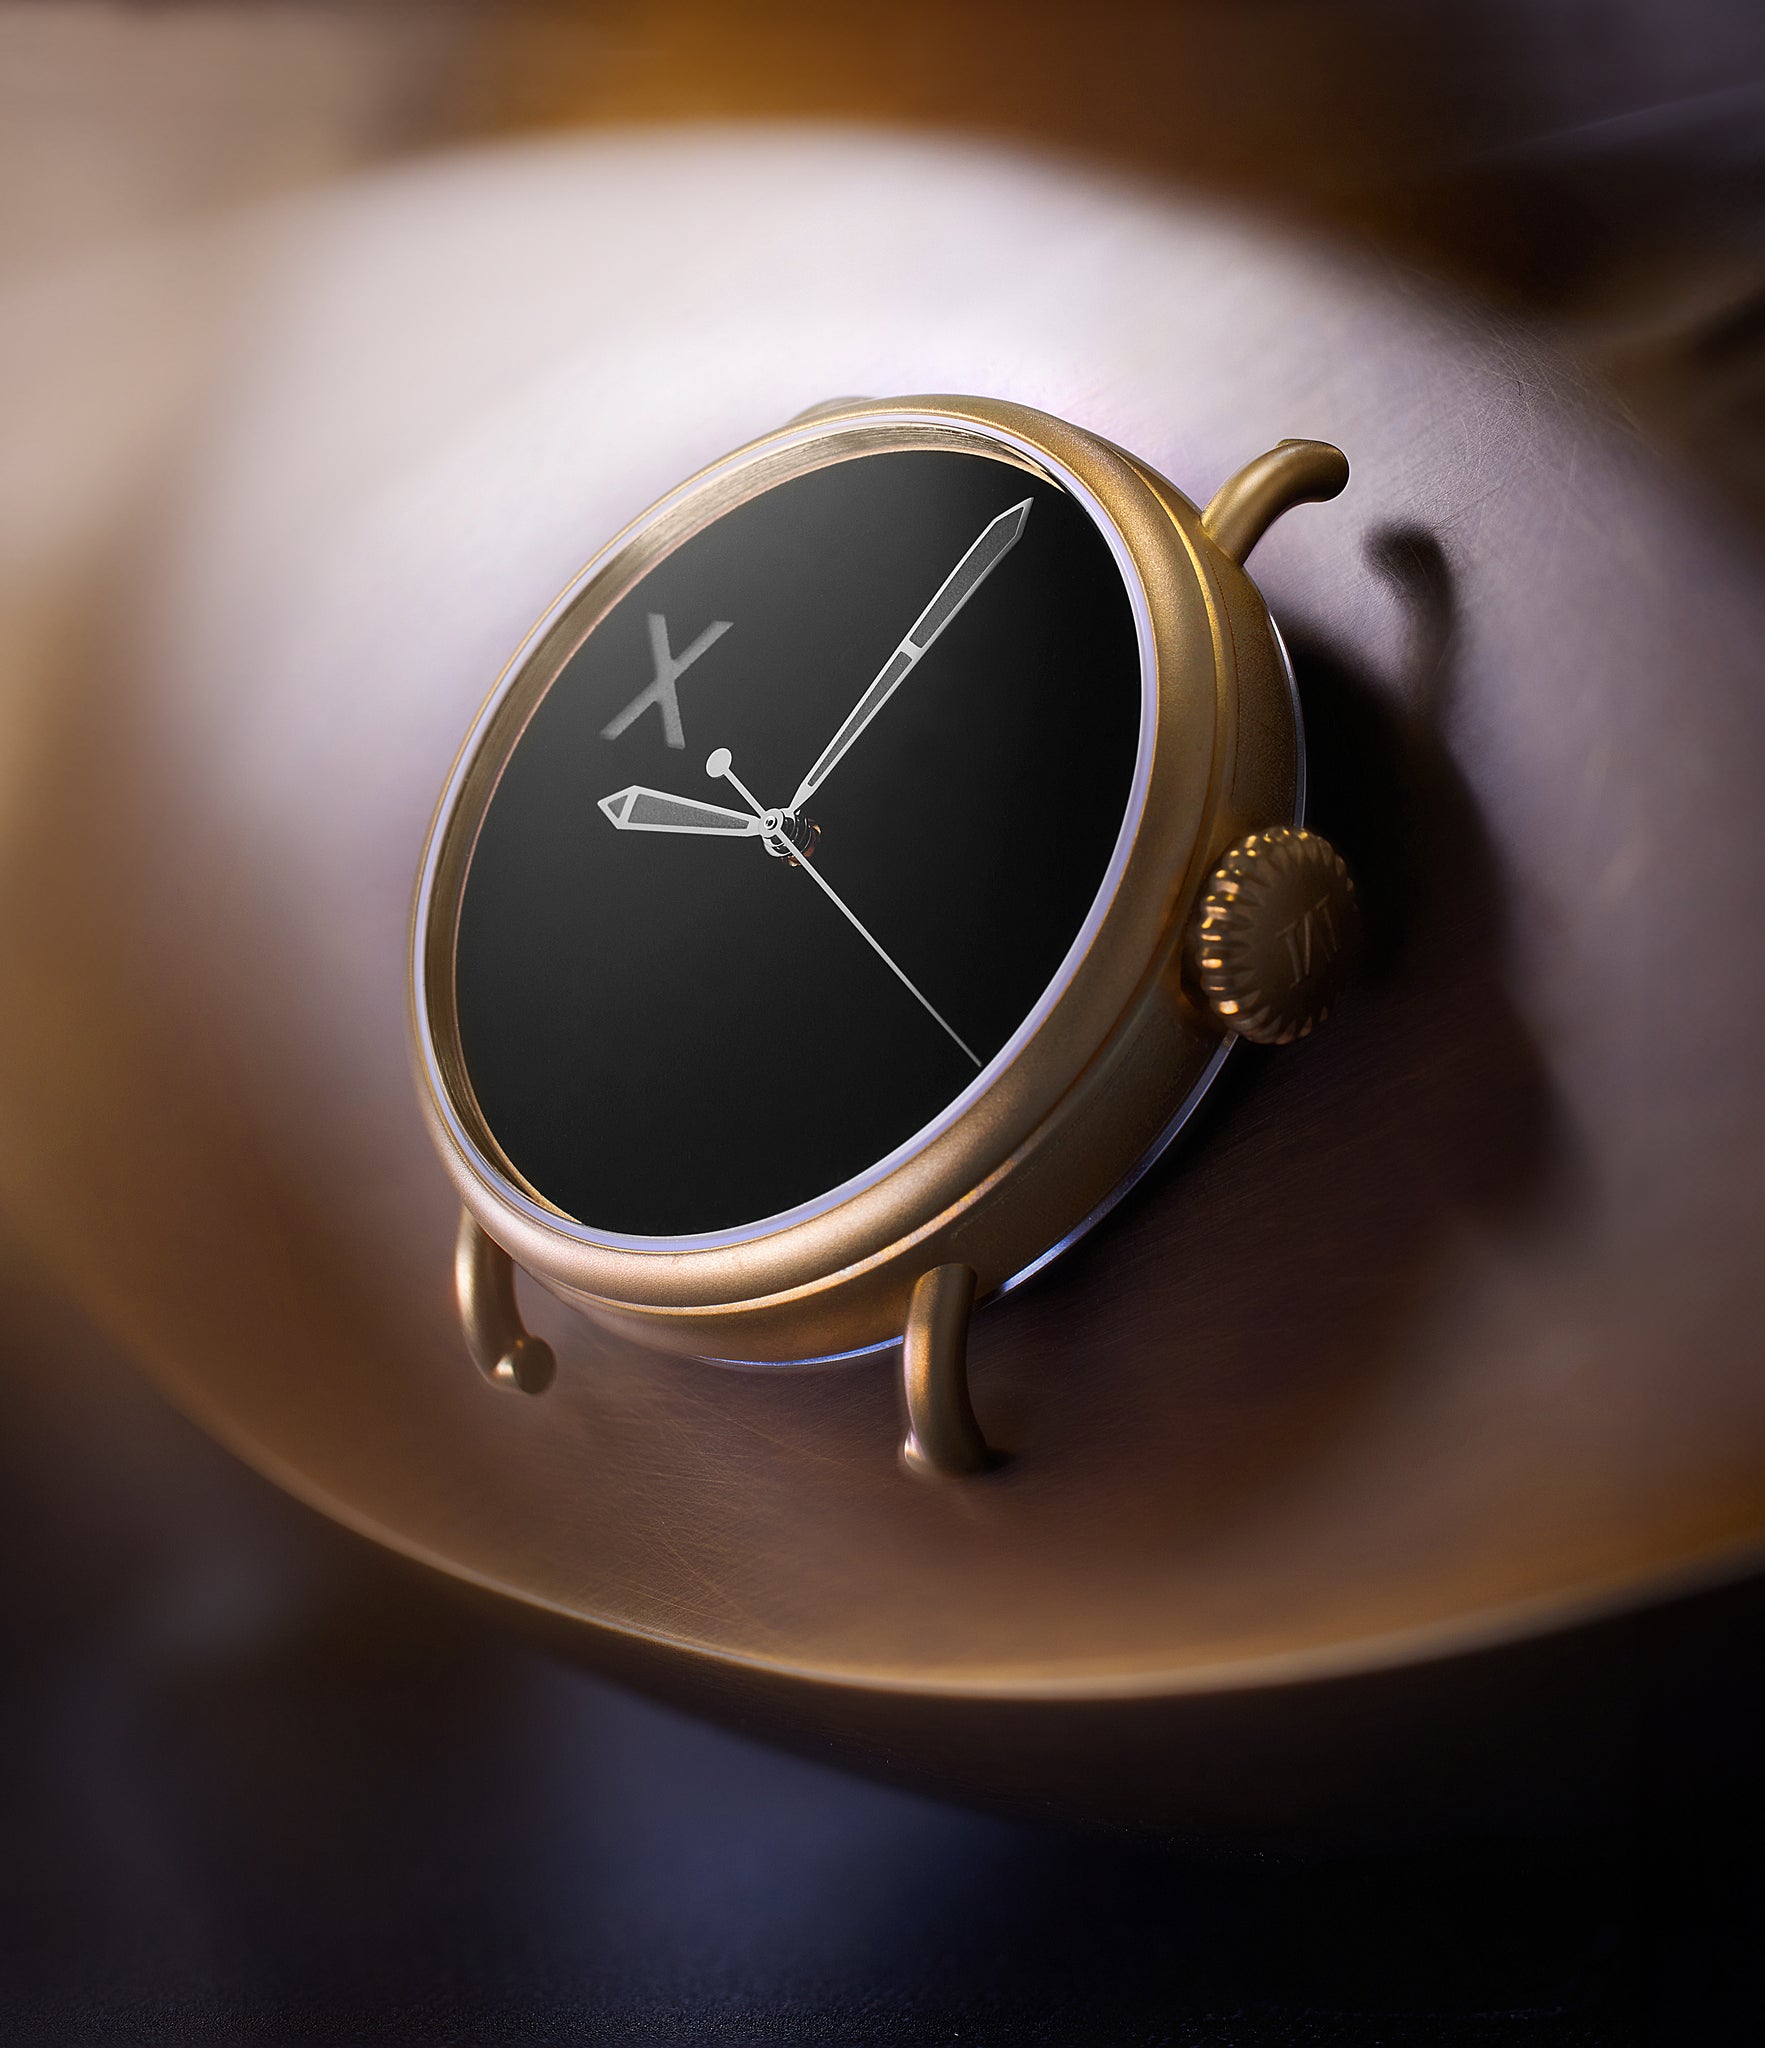 H. Moser & Cie. Confidential Project X Concept Vanta Black 8200-1700 Bronze preowned watch at A Collected Man London